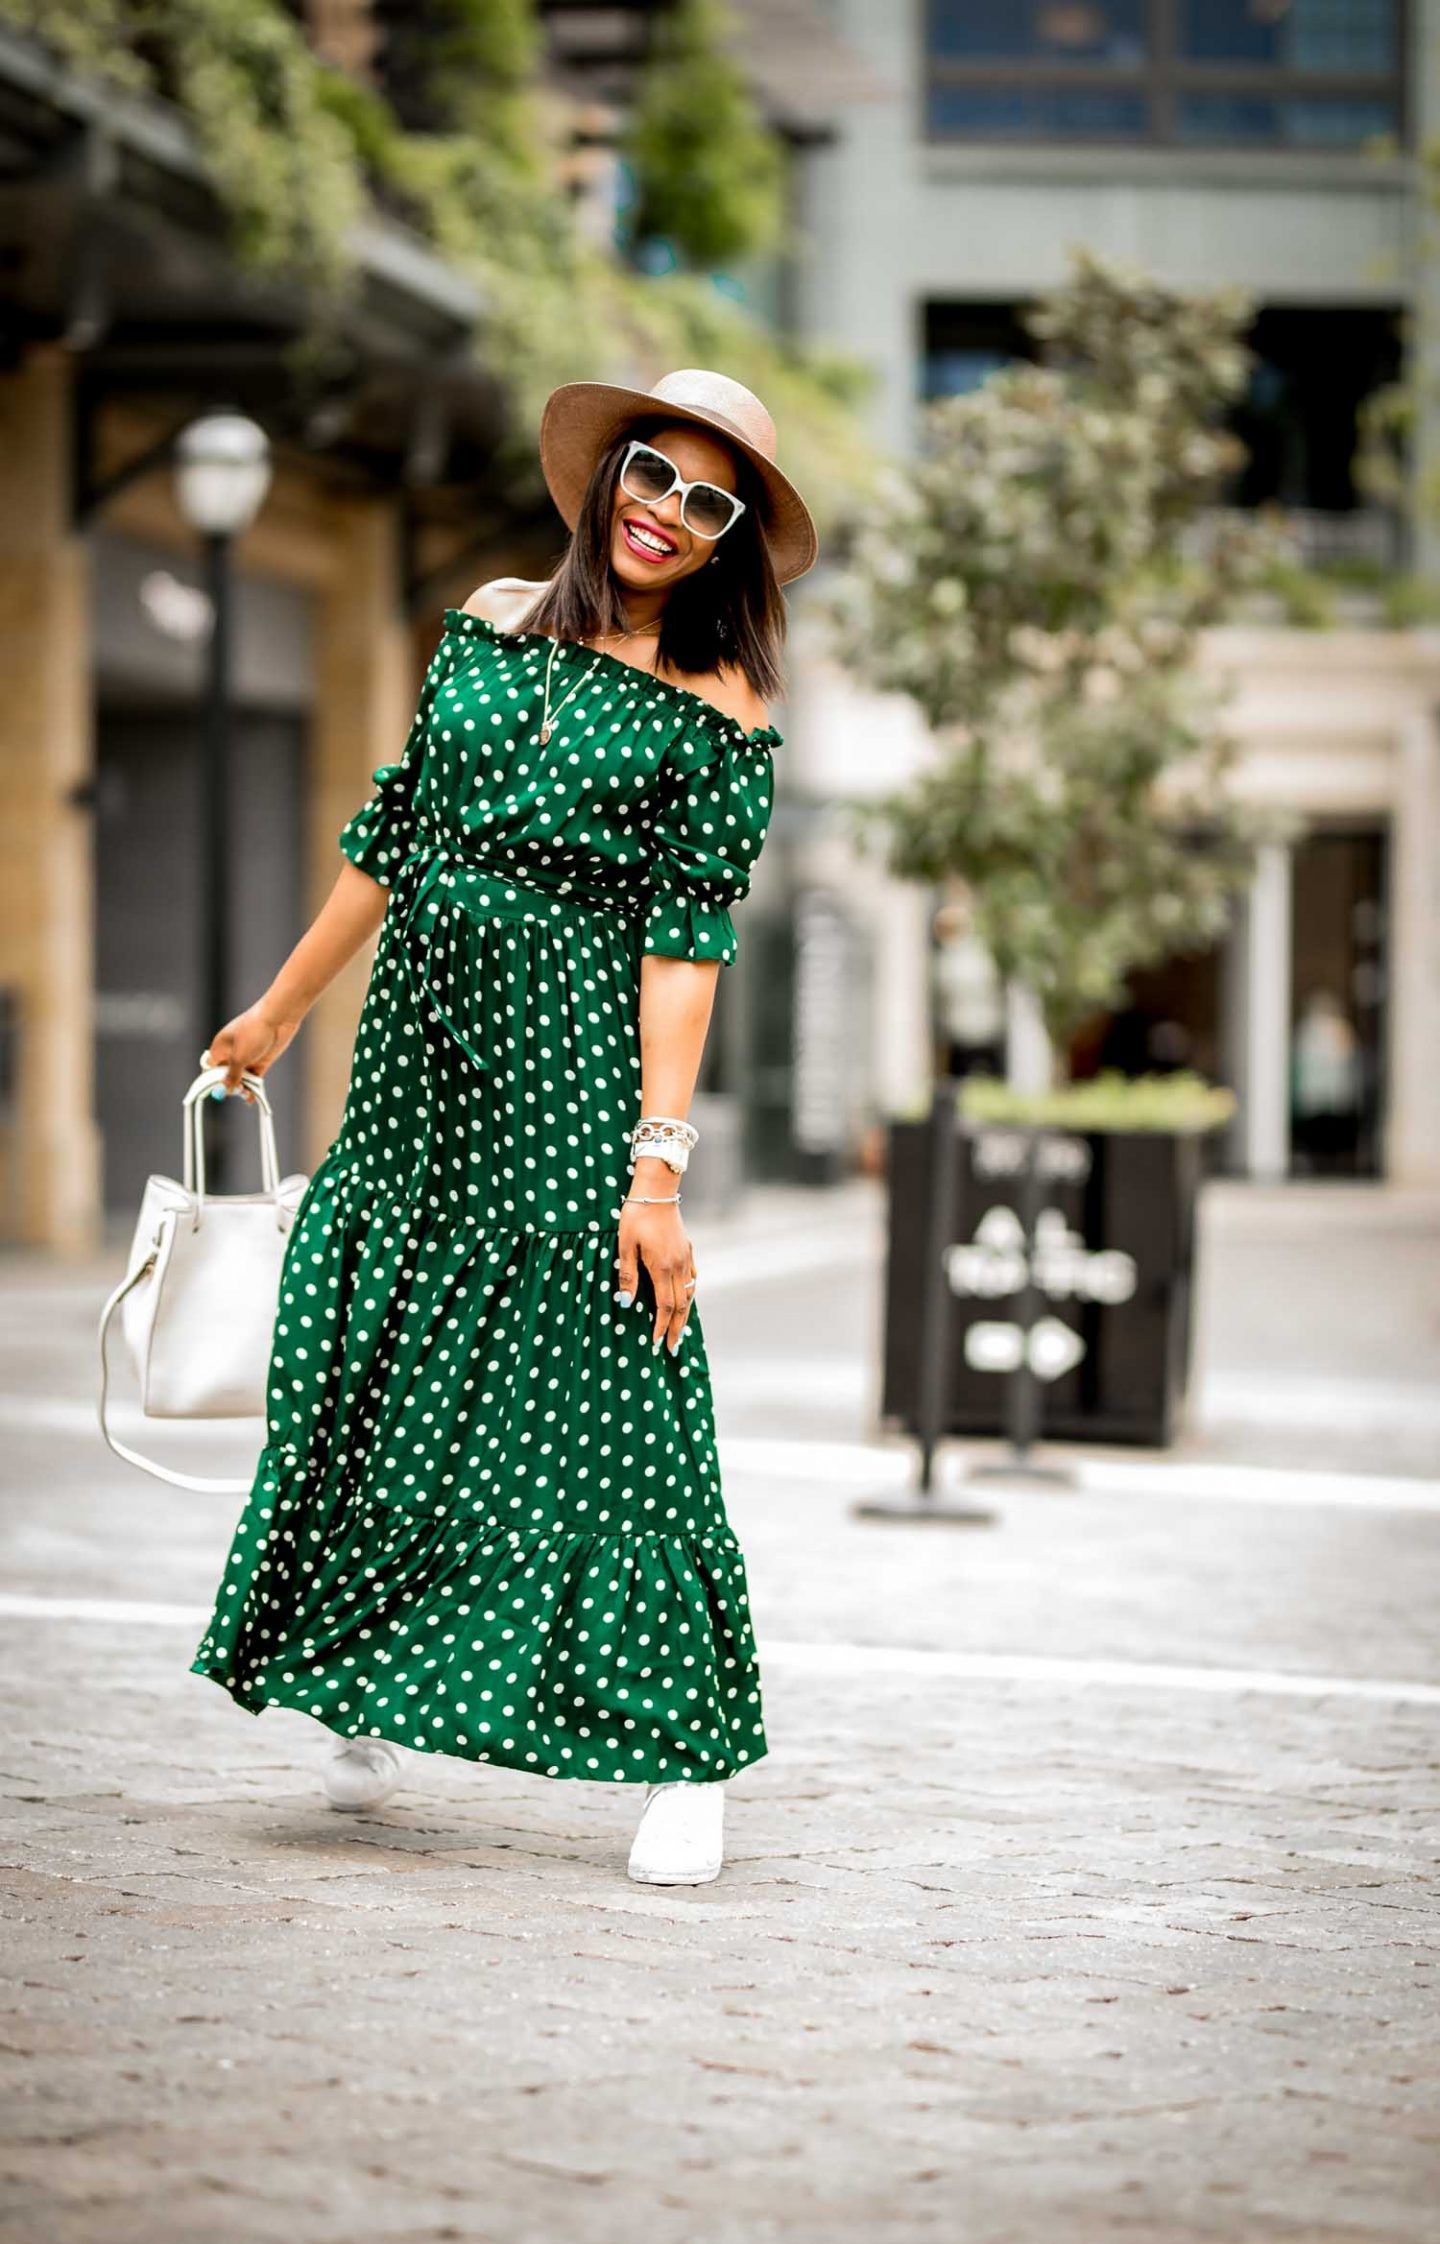 CONNECTING THE DOTS – A MODERN WAY TO STYLE THE POLKA-DOT TREND -   16 dress Spring polka dots ideas